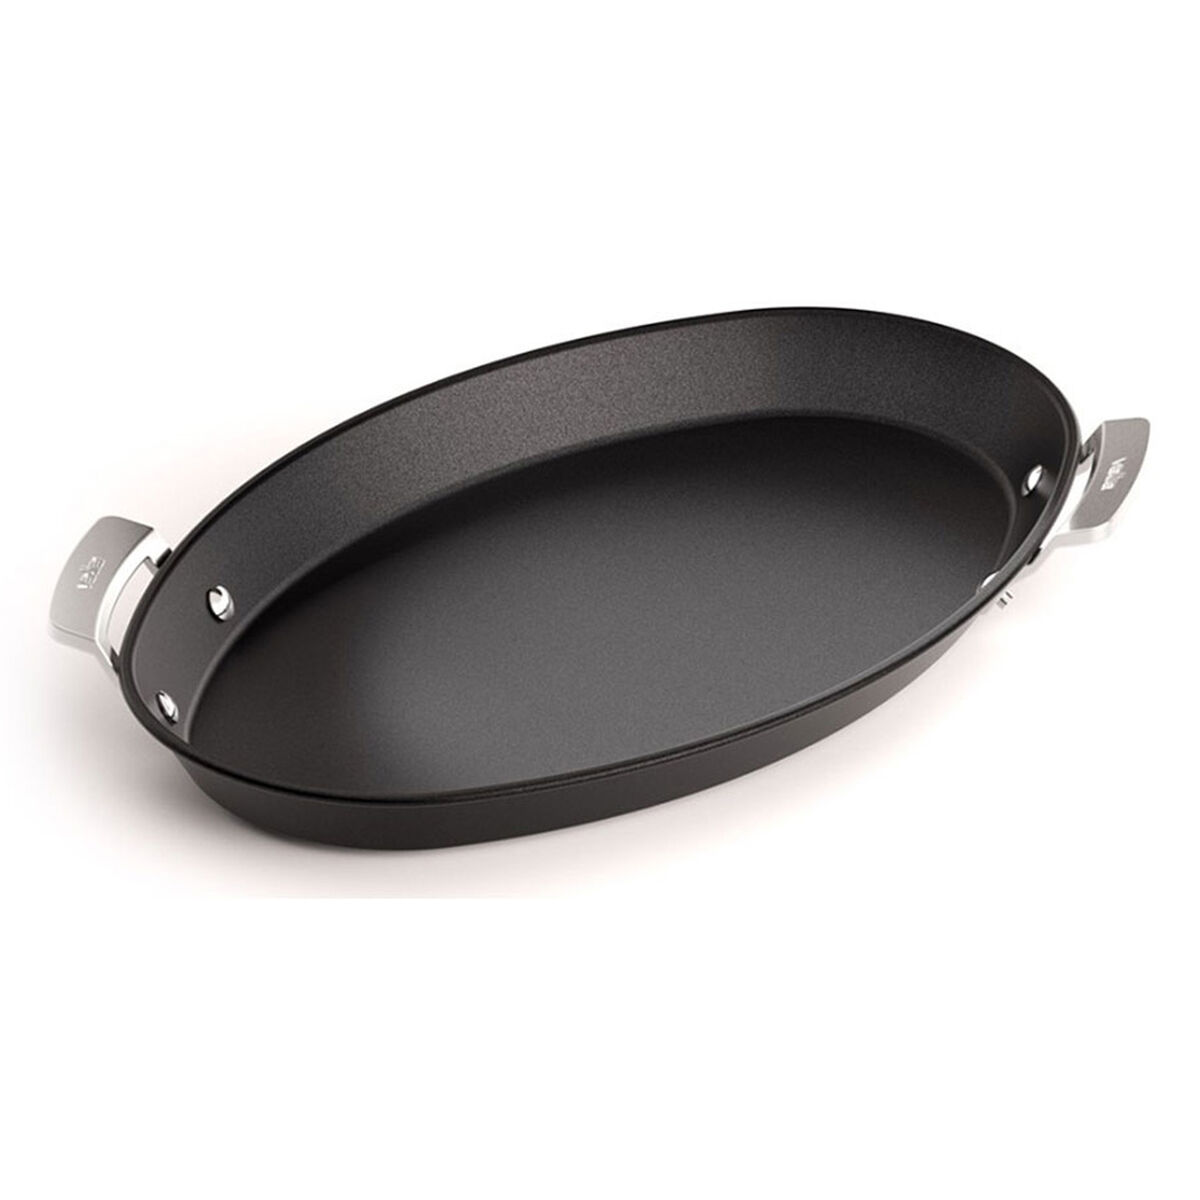 Griddle Plate Valira 4654/25 Induction Fish With handles 40 x 25 cm